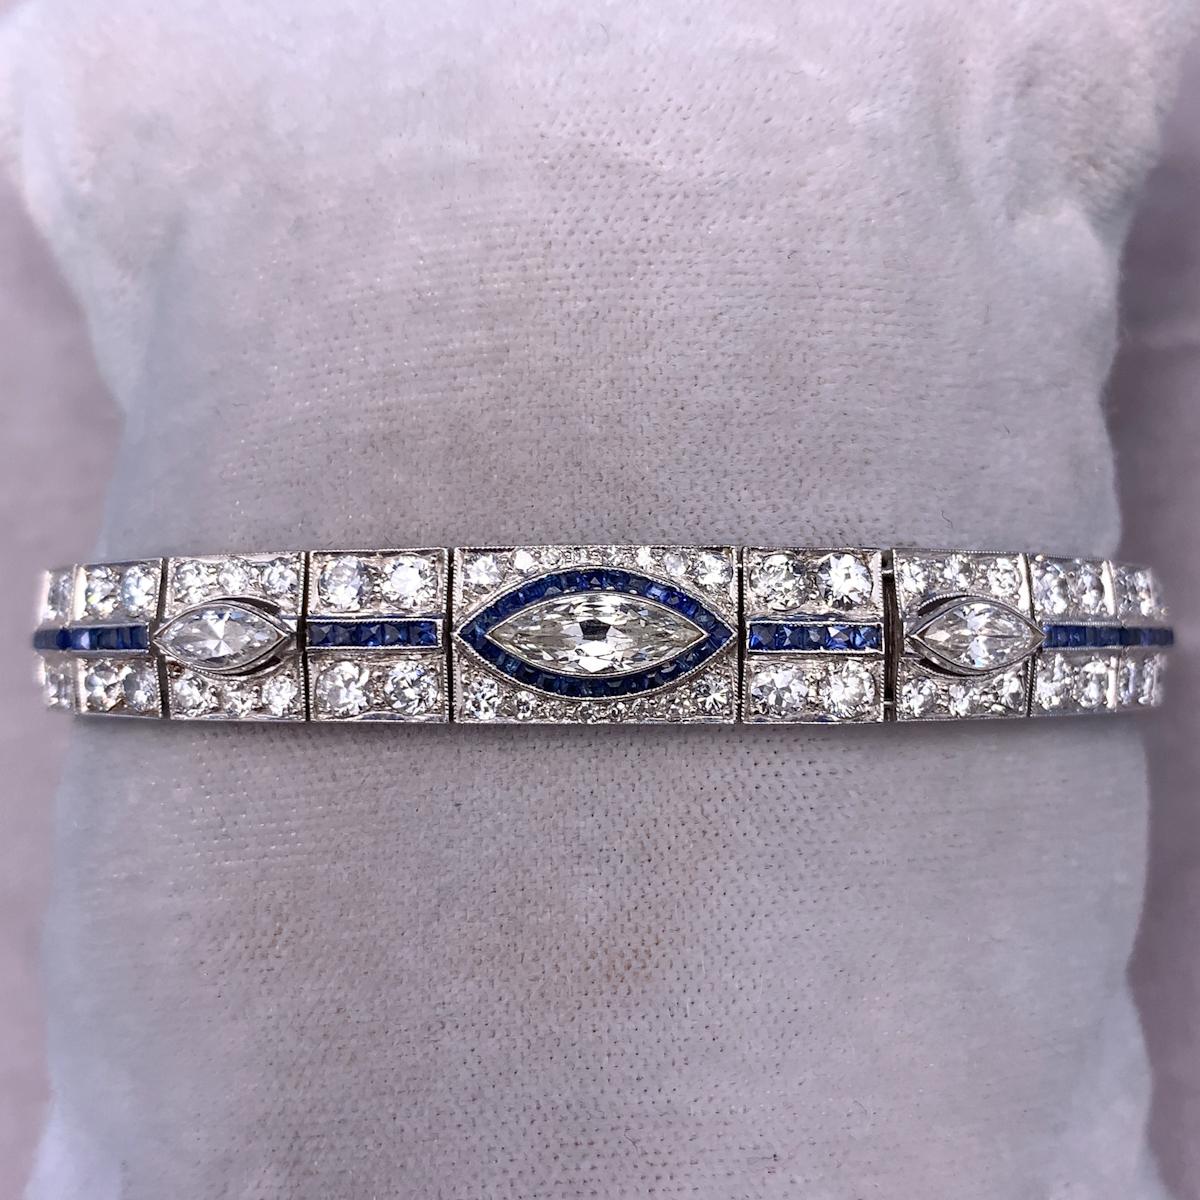 Platinum Art Deco 8.5ct Diamond Bracelet with Synthetic Sapphires (#J4561)

Antique platinum Art Deco diamond bracelet featuring 8.5 carats of diamonds accented by calibre cut synthetic blue sapphires. There are a total of 124 diamonds including 3